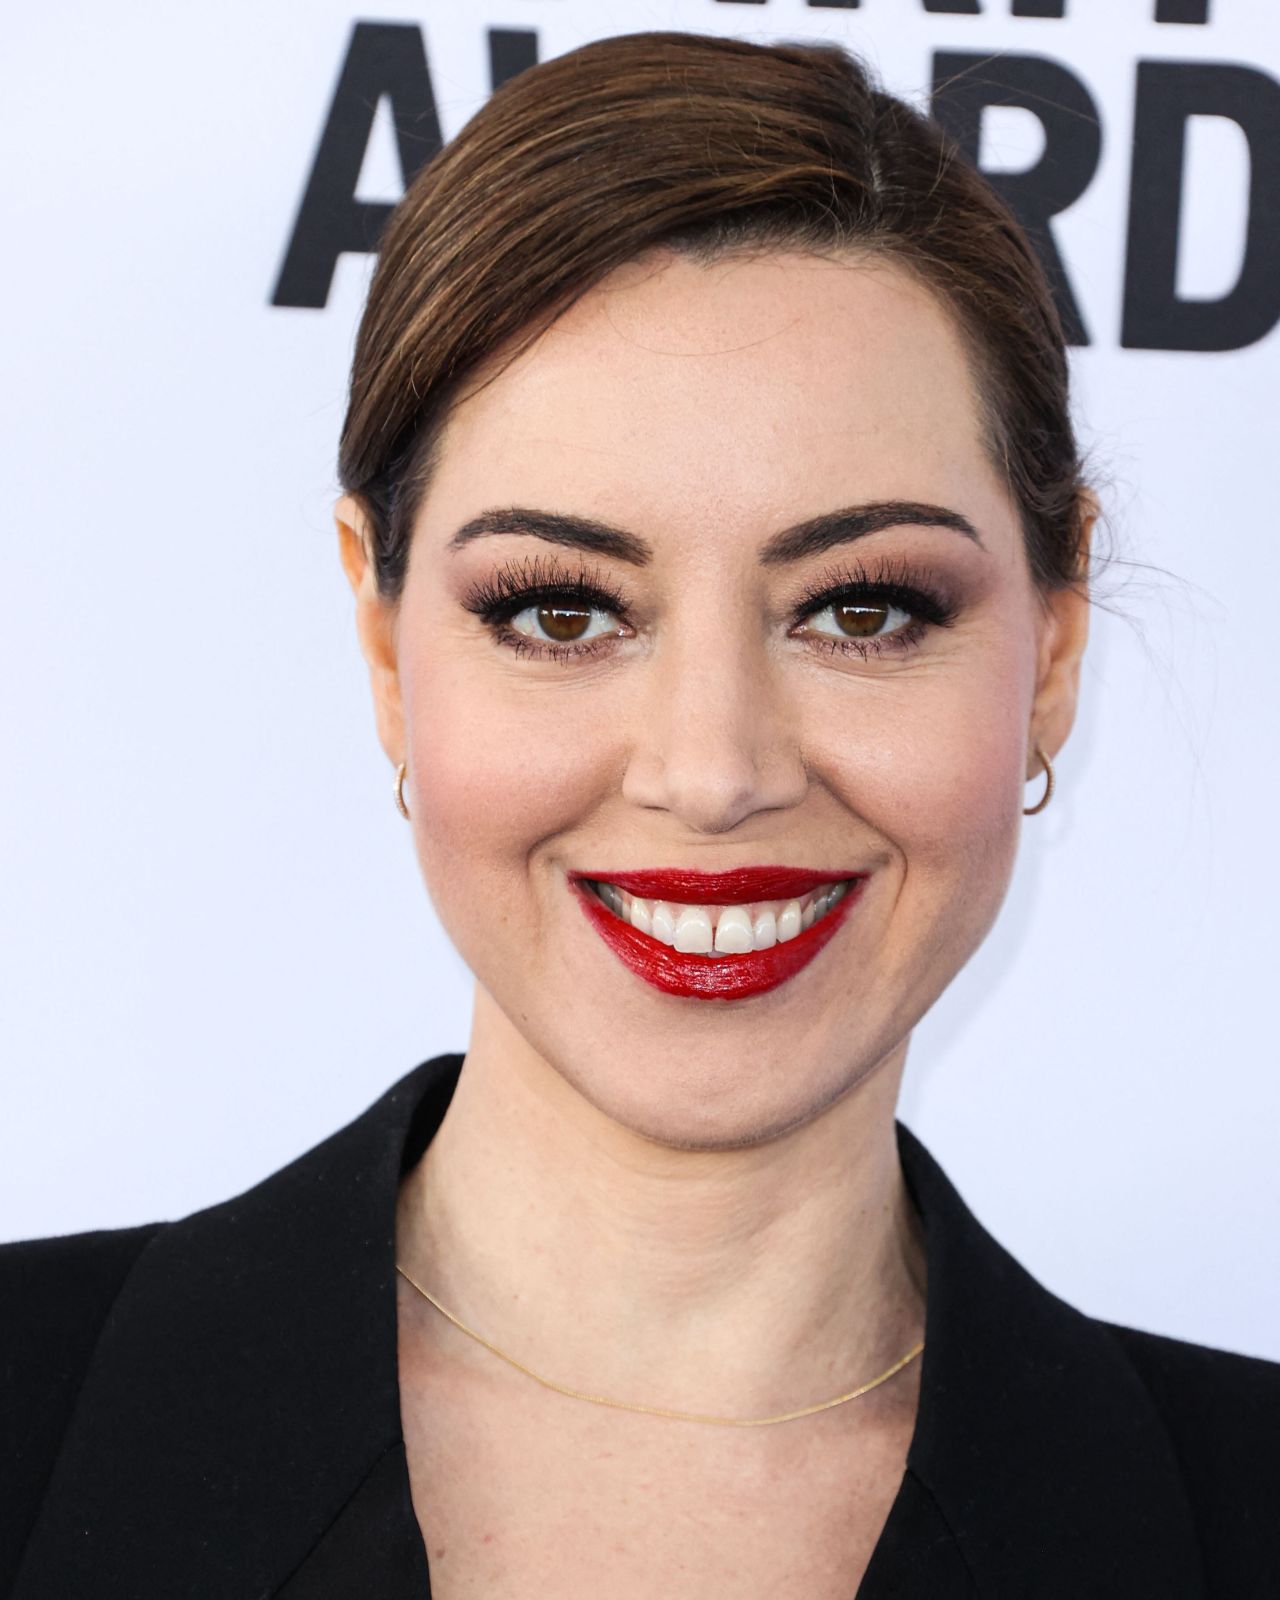 AUBREY PLAZA AT THE INDEPENDENT SPIRIT AWARDS IN LOS ANGELES09